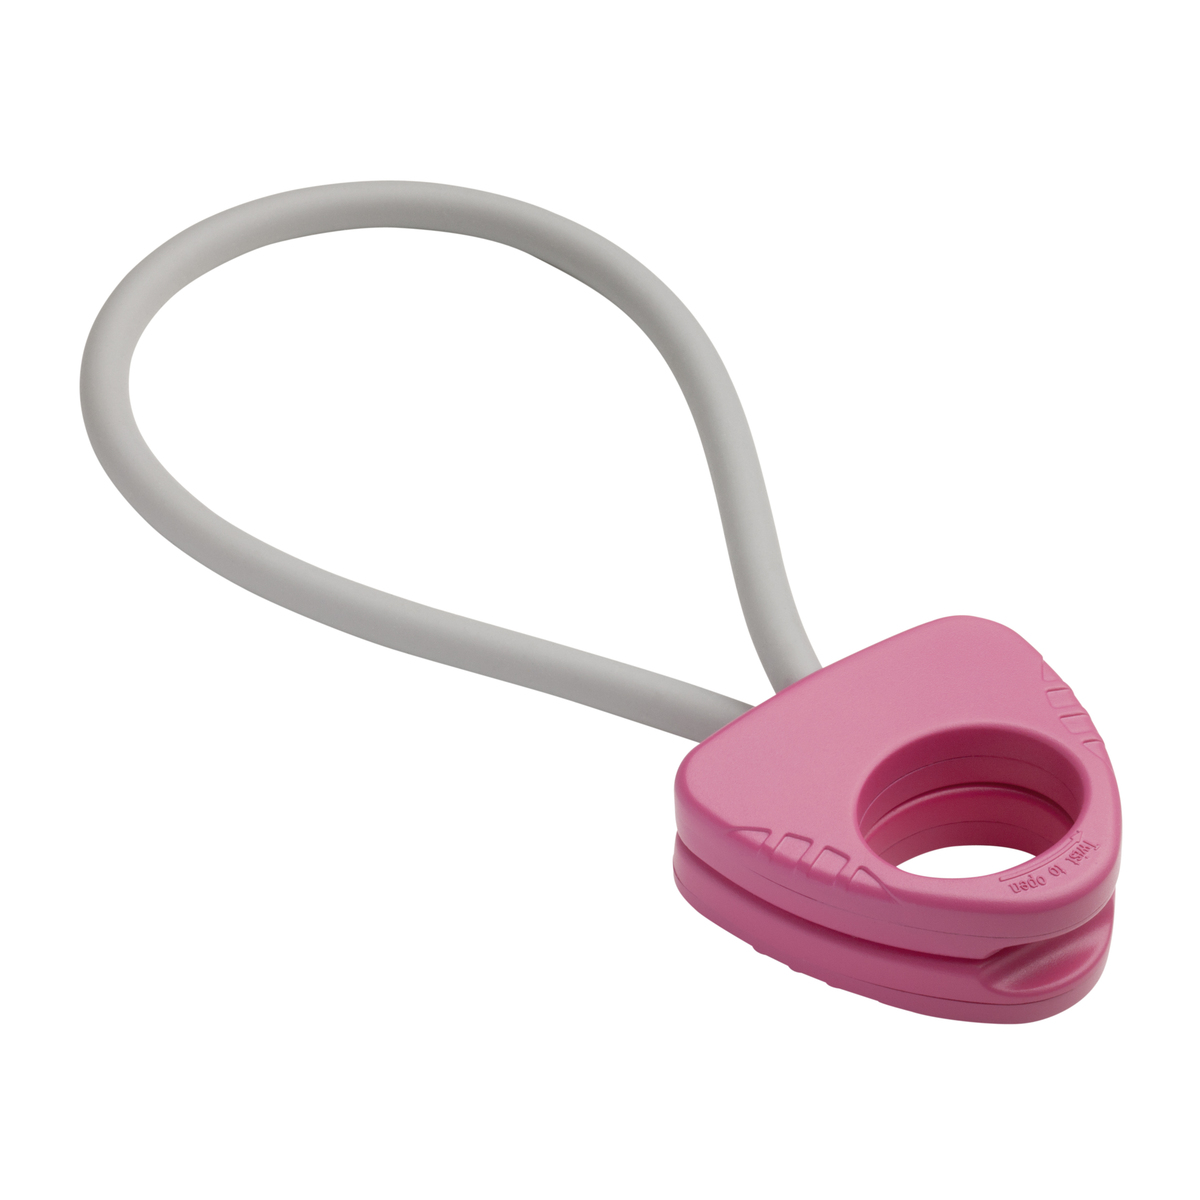 LM Fitness Expander REFLECTS-PERSONAL TRAINER MAGENTA magenta